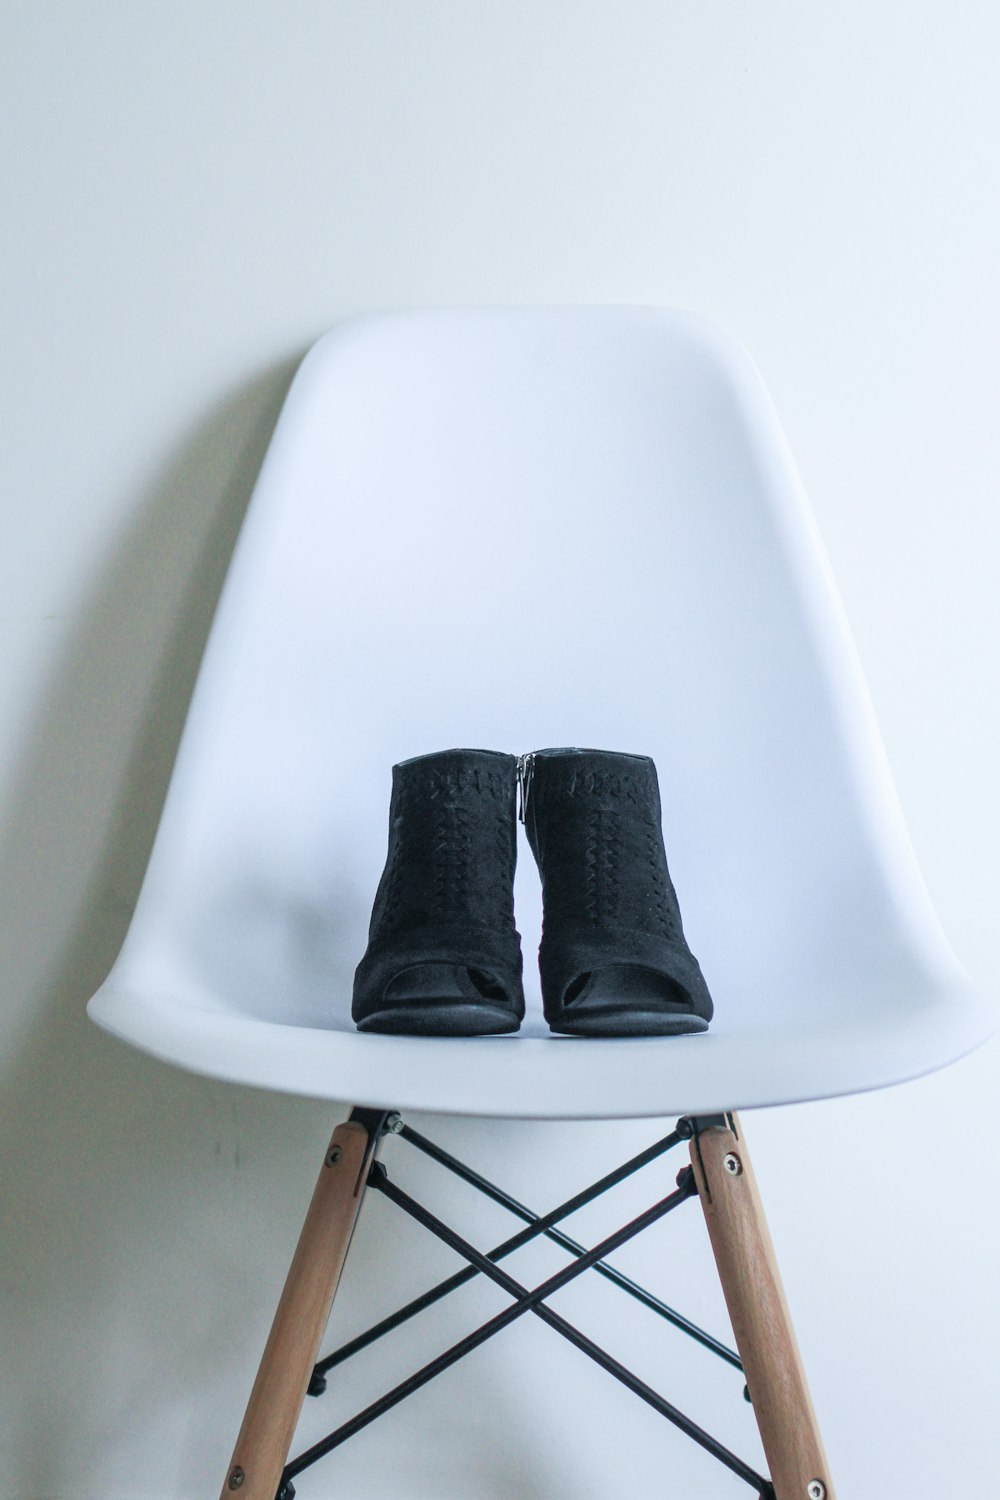 pair of black leather boots on white chair